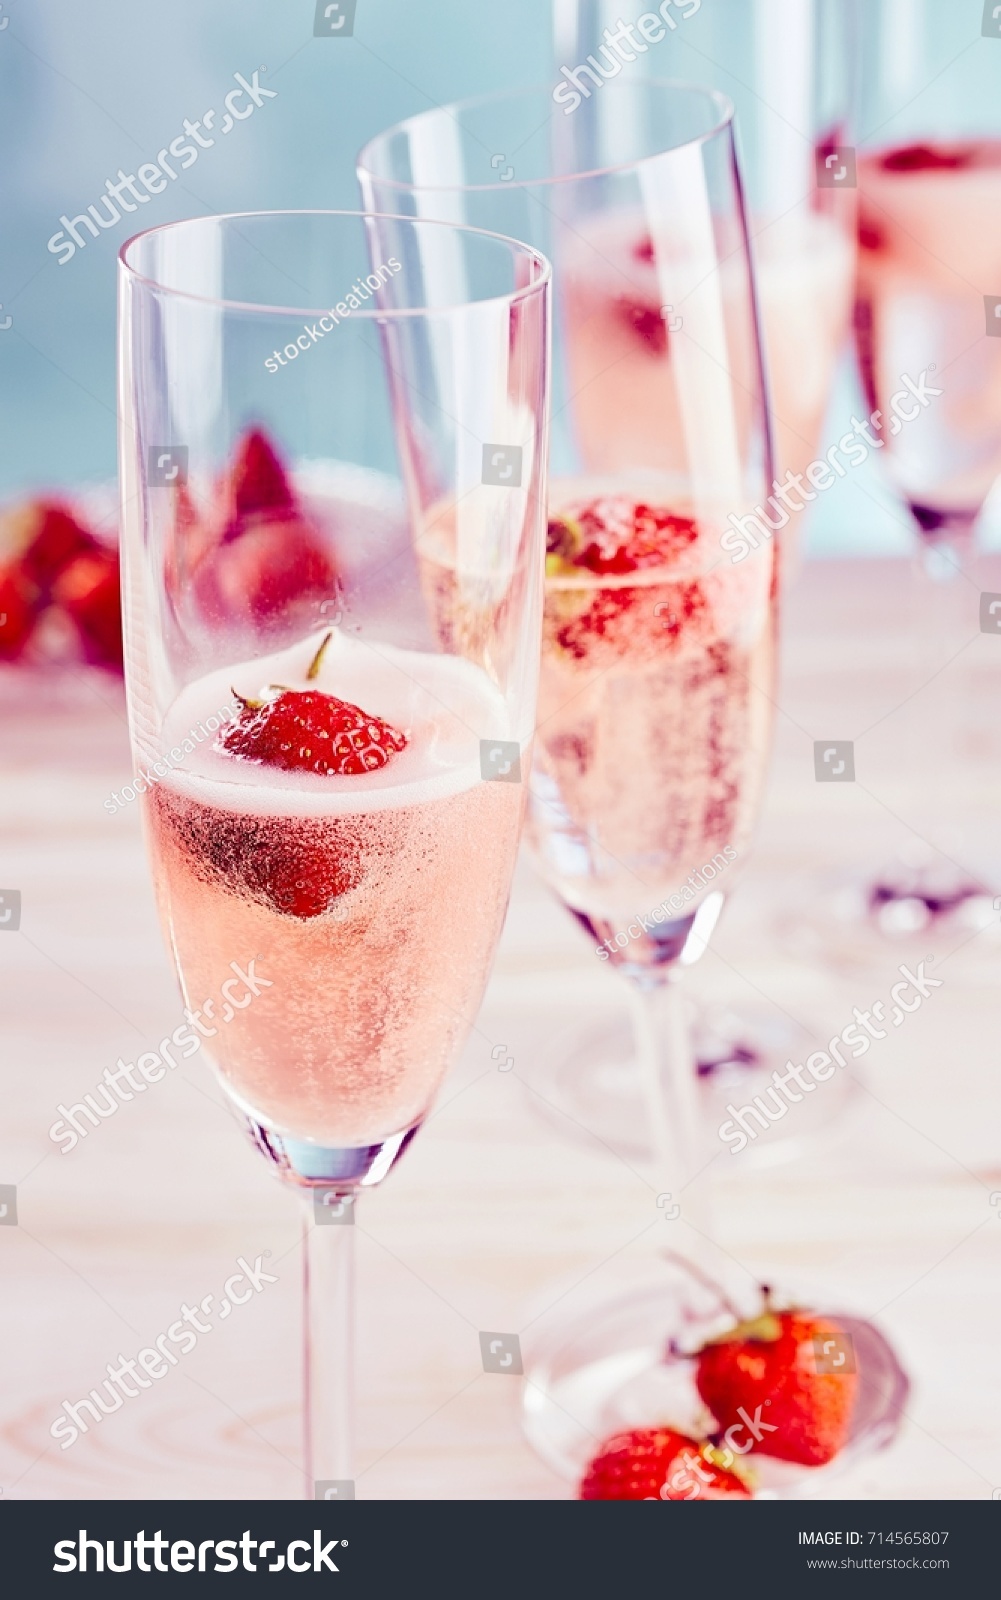 Delicious sparkling pink champagne with fresh strawberries served in stylish flutes for a romantic celebration or special occasion #714565807